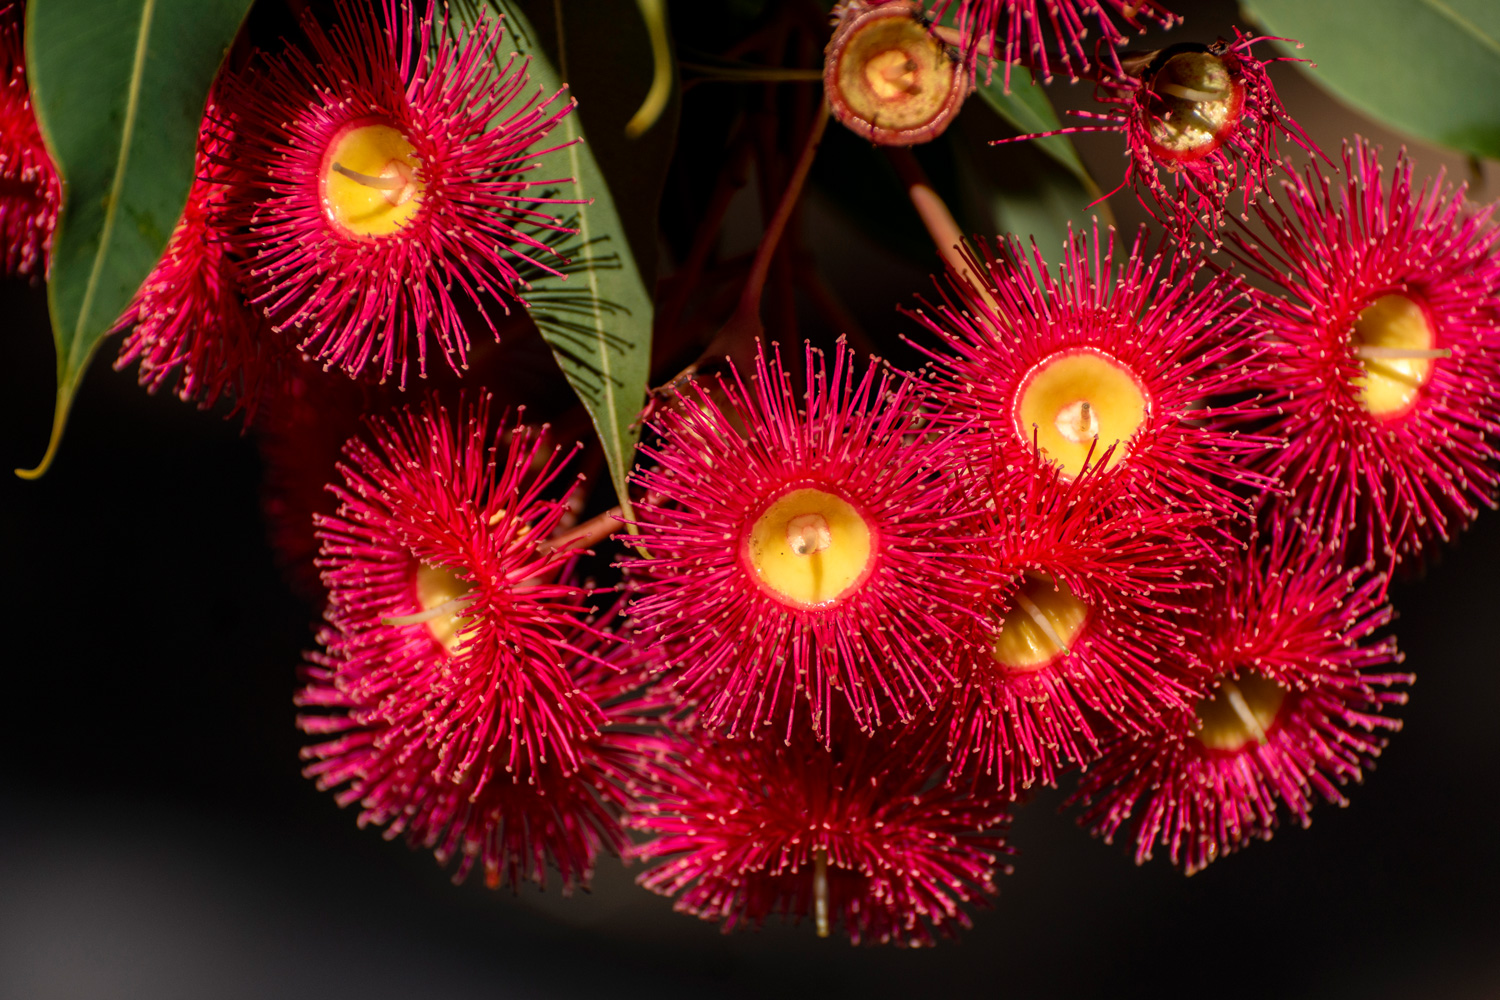 Red flowering gum tree blossoms, Corymbia ficifolia Wildfire variety,